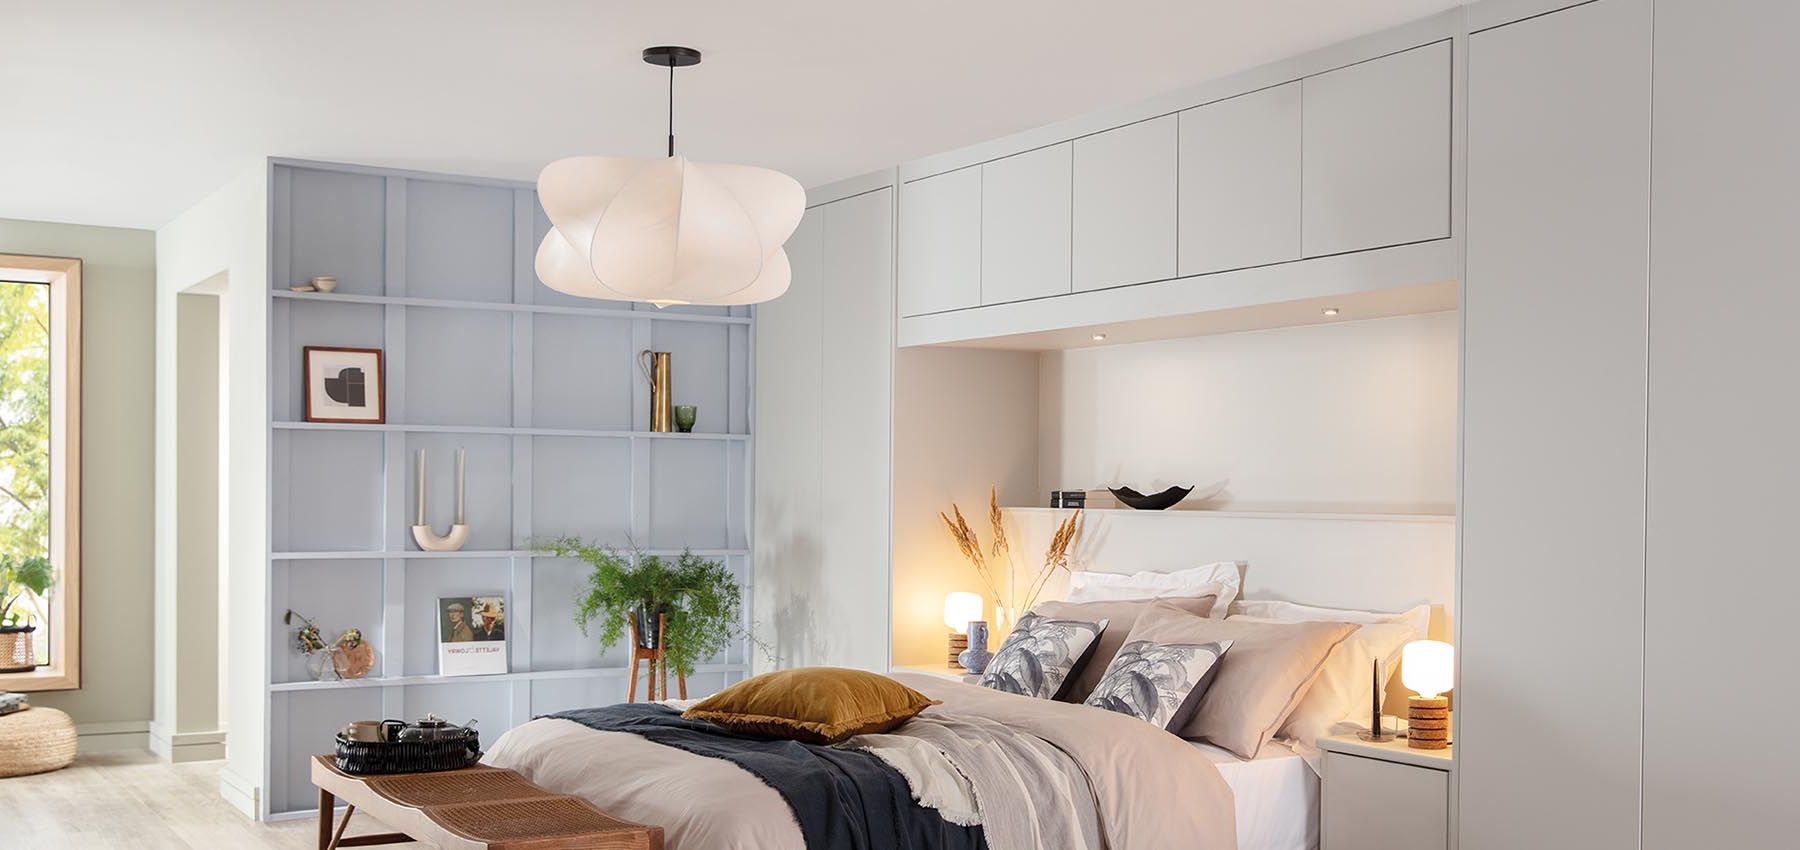 5 Reasons Why You'll Love Overbed Storage | Sharps Regarding Overbed Wardrobes (View 8 of 20)